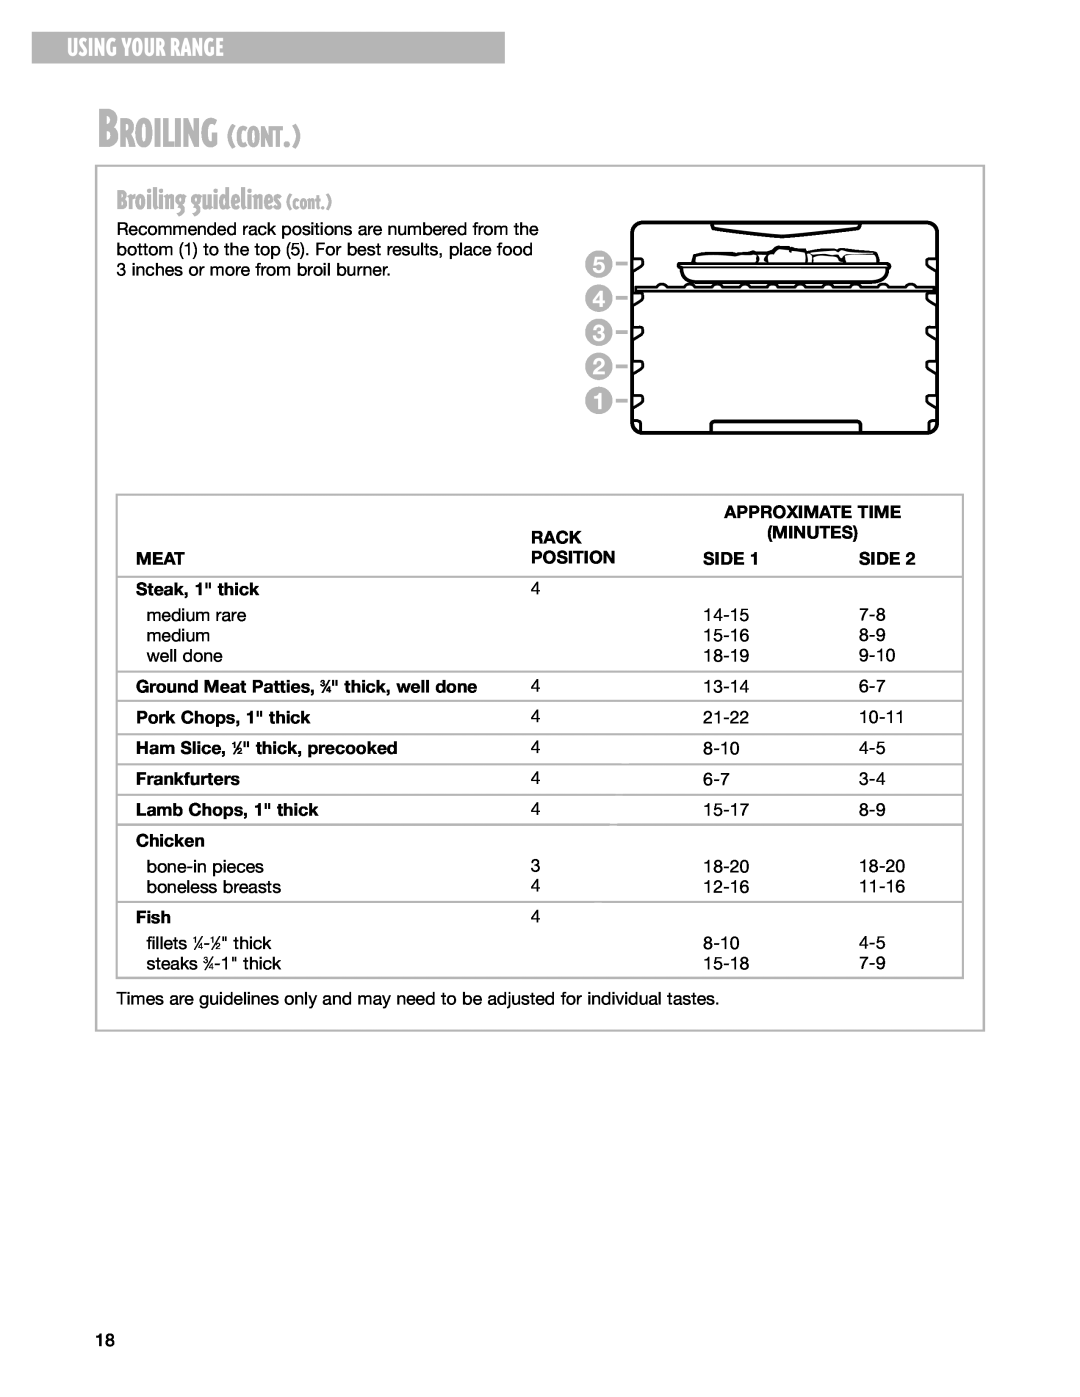 Whirlpool SGS375H Broiling guidelines cont, Broiling Cont, Using Your Range, Approximate Time, Rack, Minutes, Meat, Side 